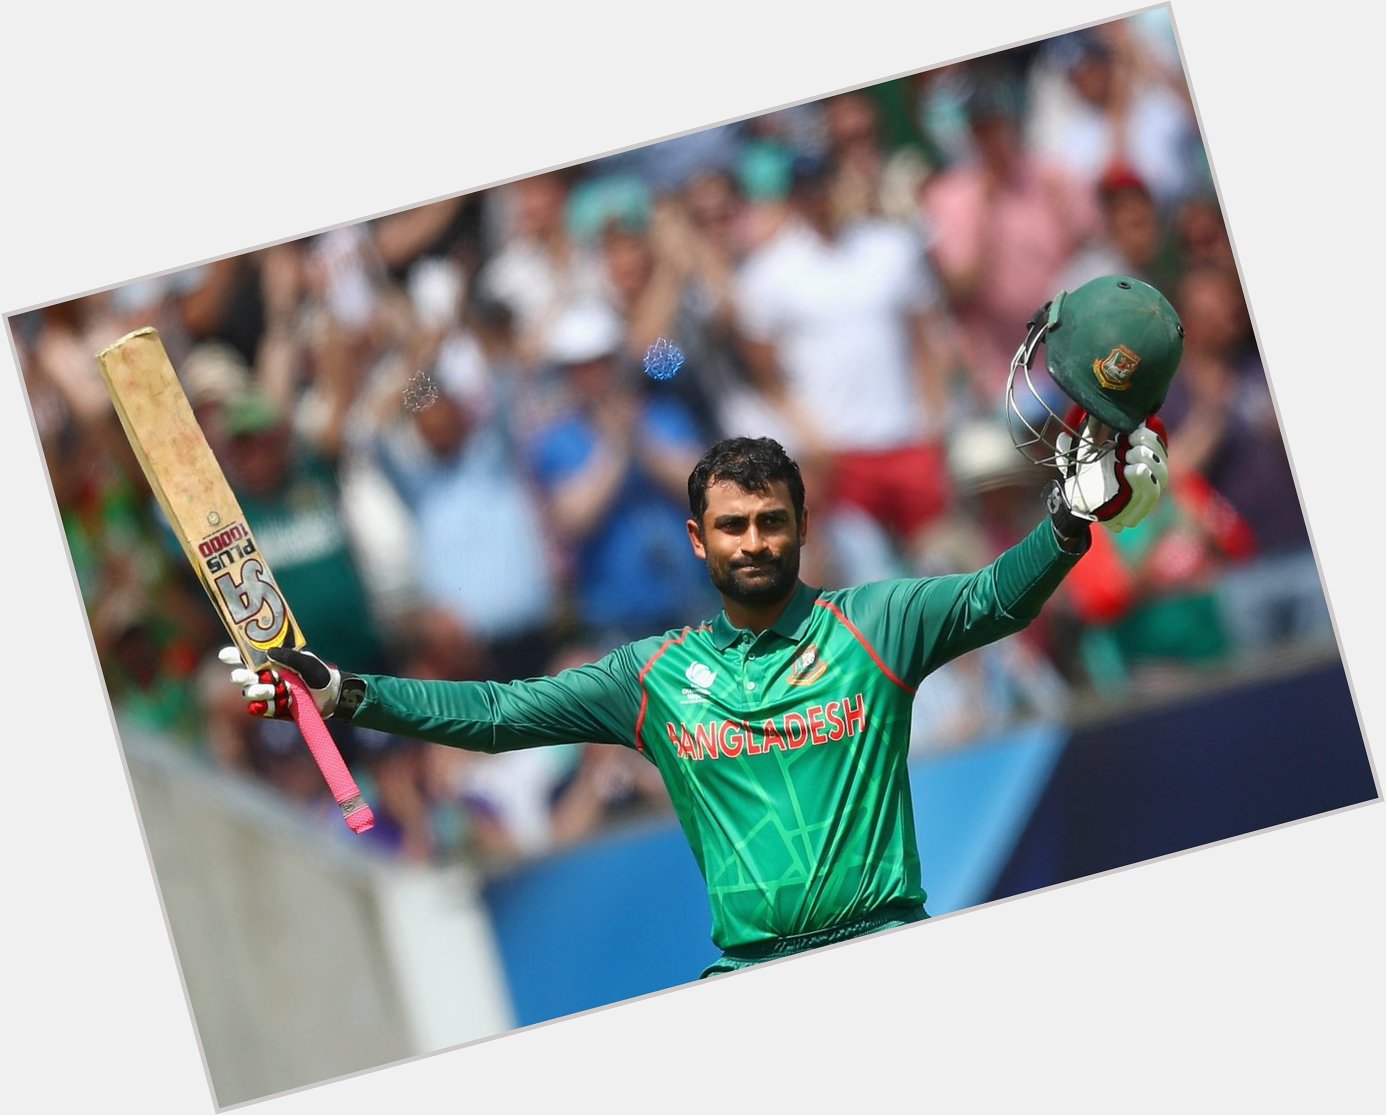  Happy Birthday To You My Best Playar of Cricketer Bom Bom Tamim Iqbal Khan Love you so much Boss  